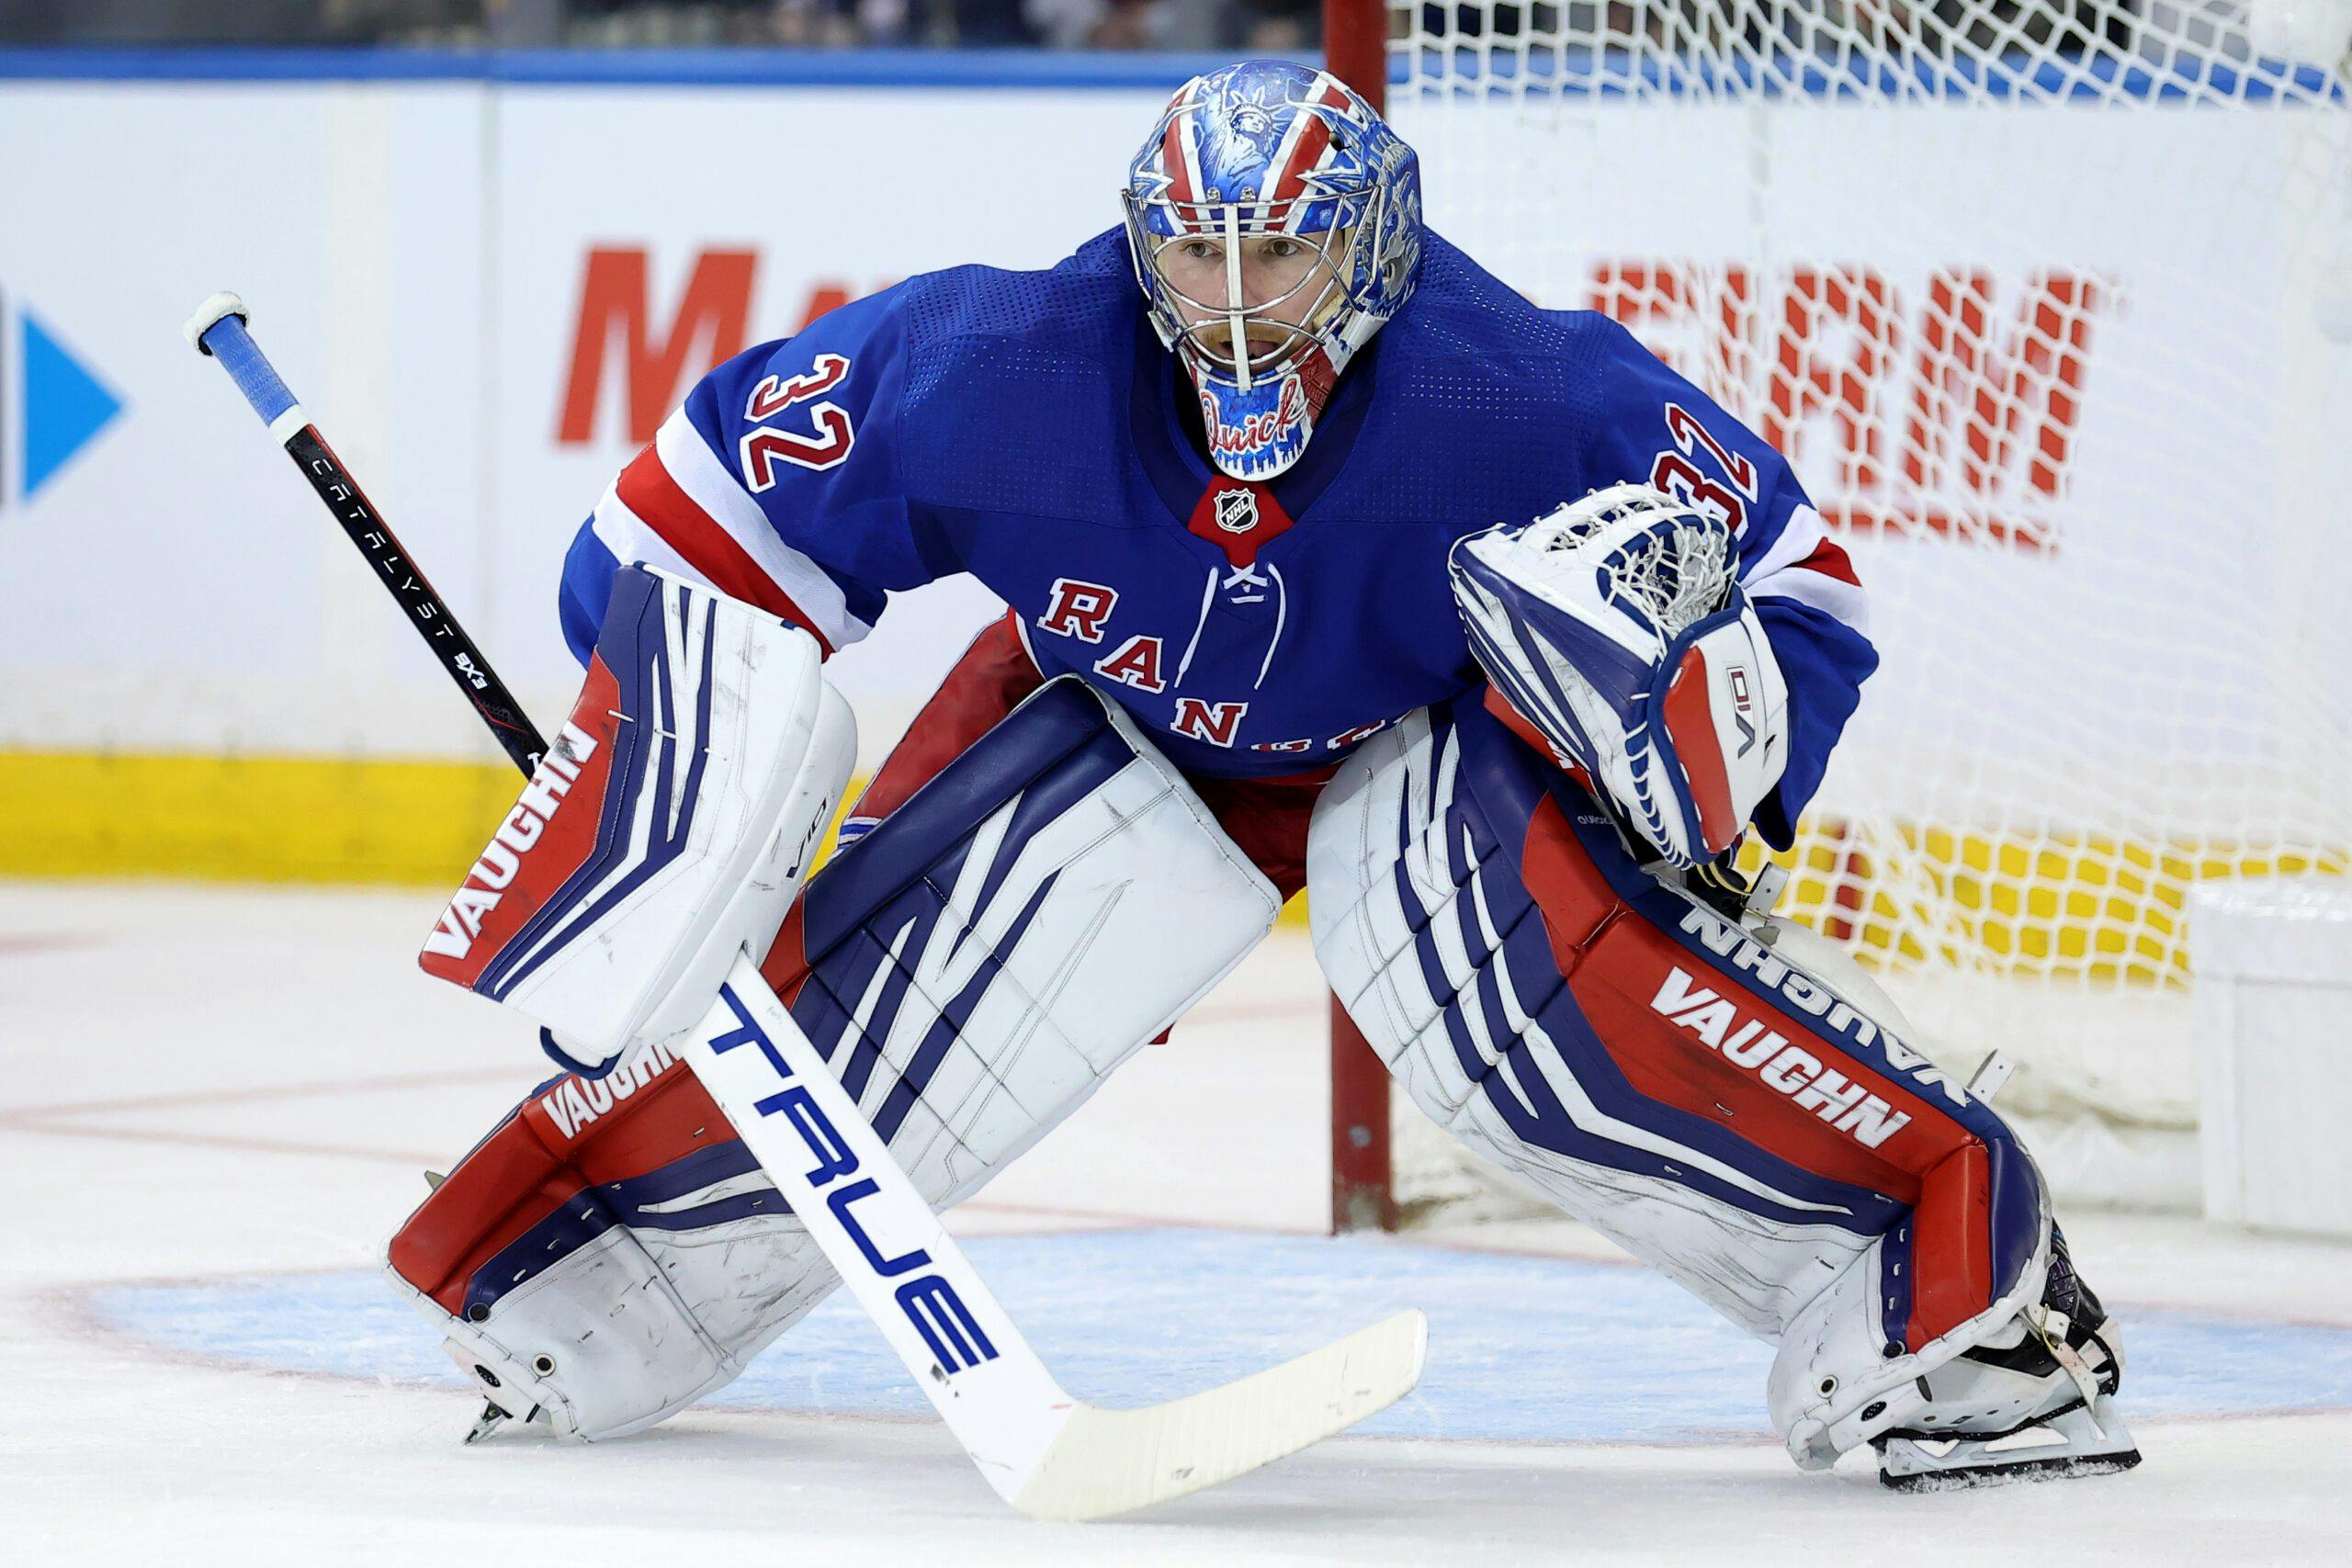 At 37, Jonathan Quick playing some of the best hockey of his career with New York Rangers